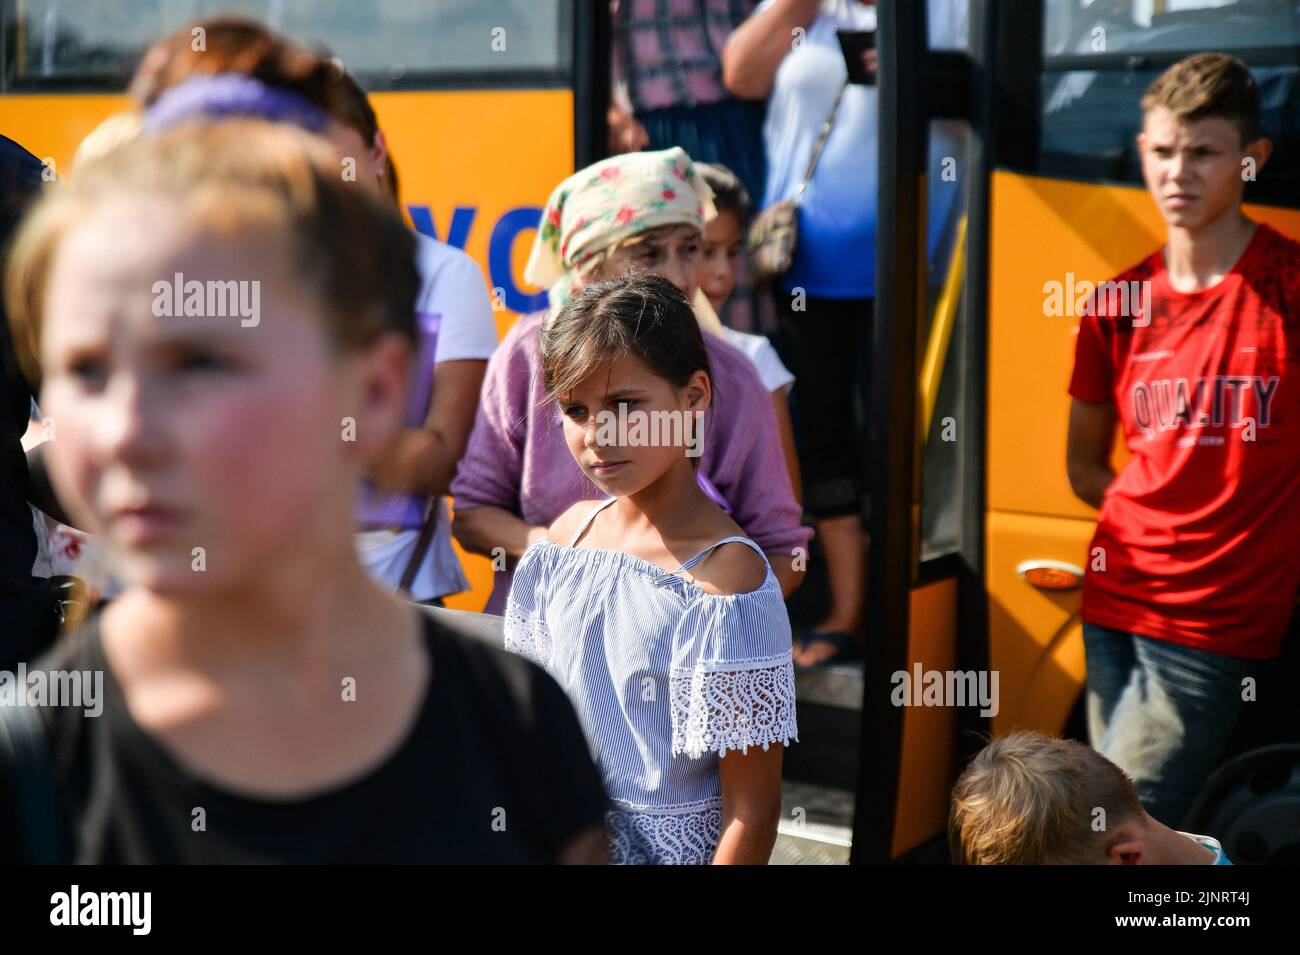 A young girl waits in Zaporizhzhia after evacuating from the occupied town of Rozovka. As the war continues, refugees continue to flee the violence of war. Stock Photo